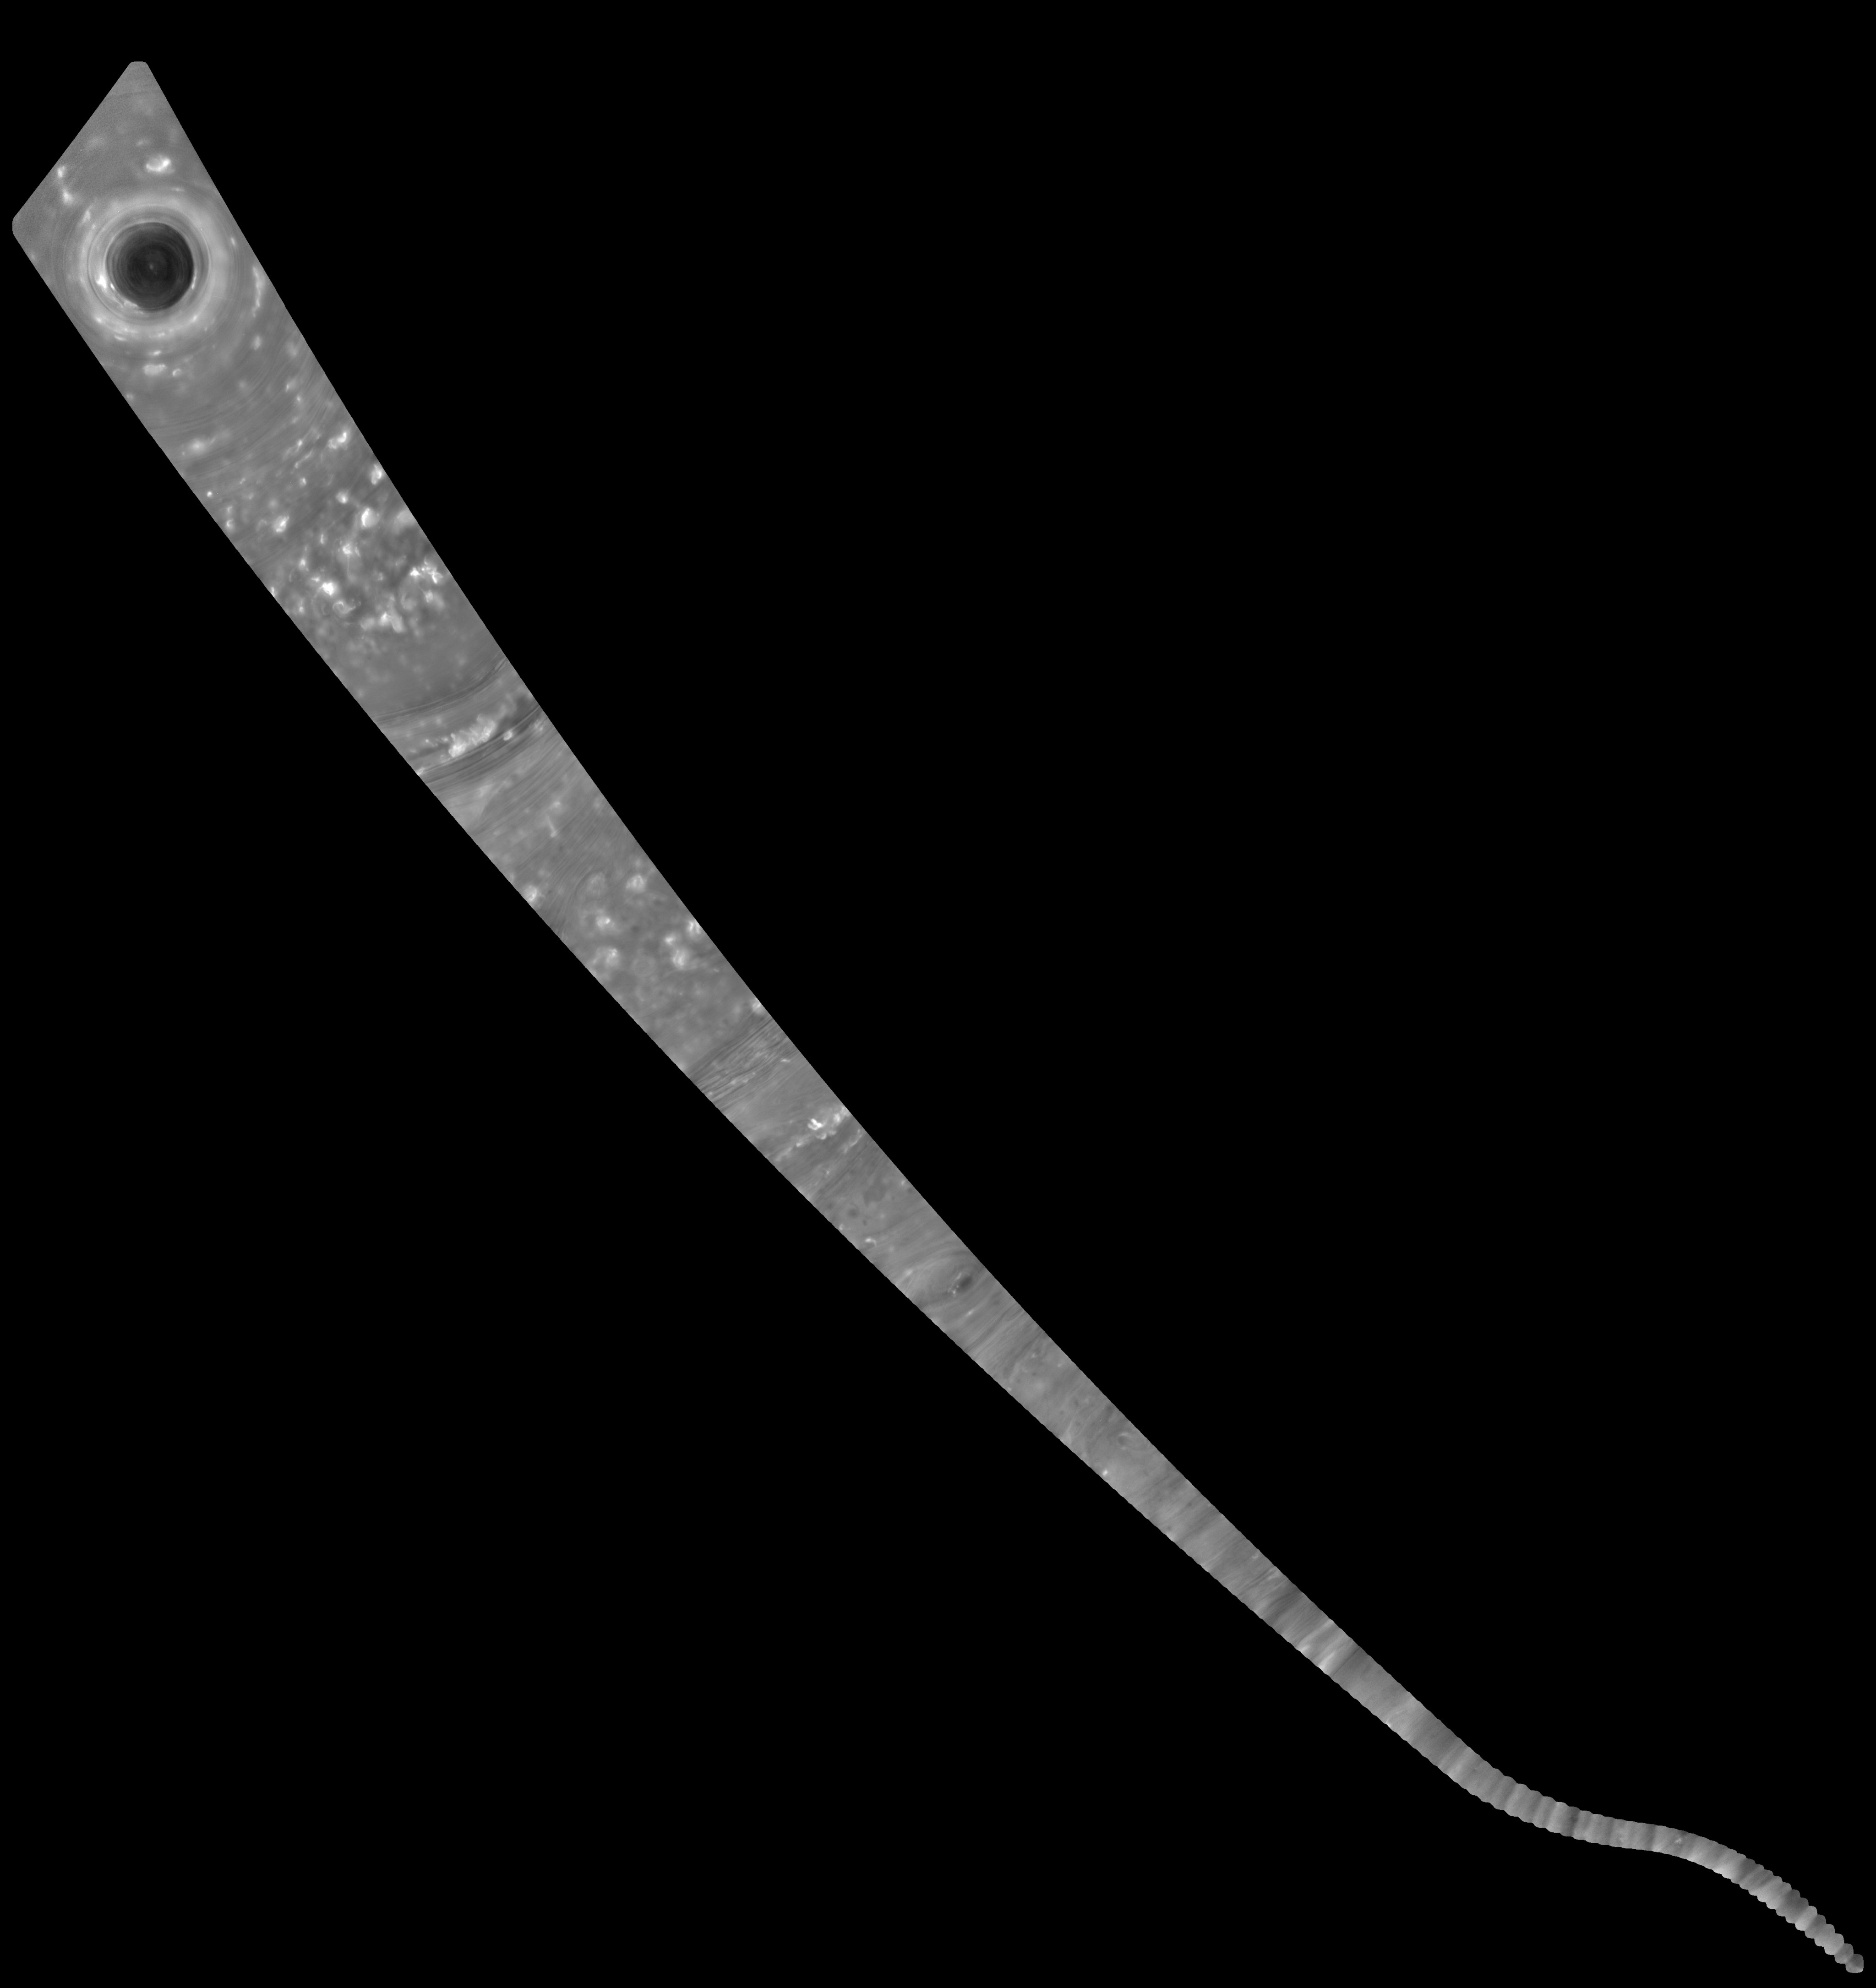 Long, narrow noodle-like image showing a strip of Saturn's atmosphere.